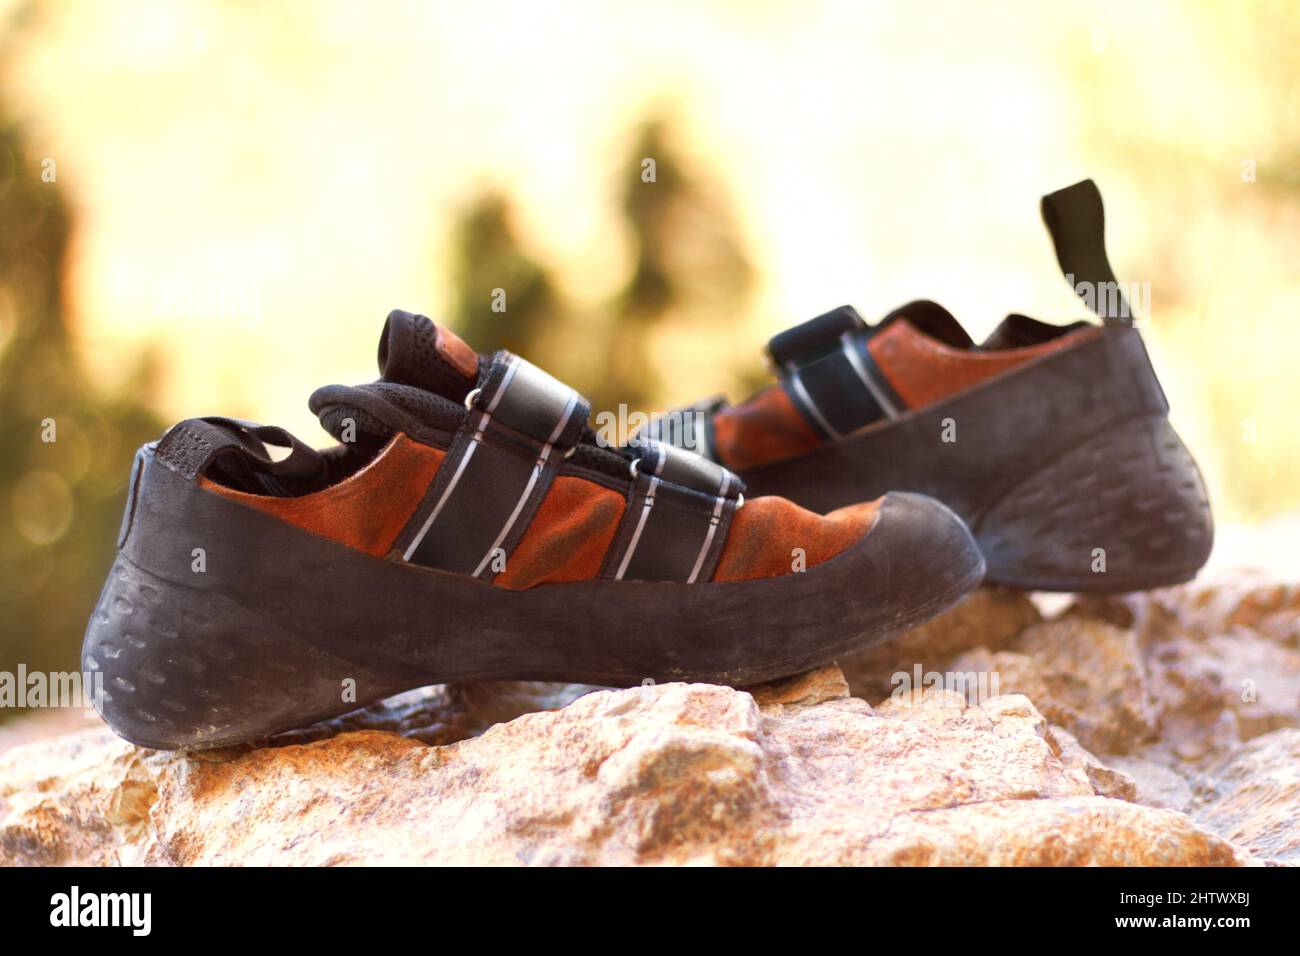 The perfect pair of climbing shoes. Climbing shoes lying on a rock outdoors. Stock Photo